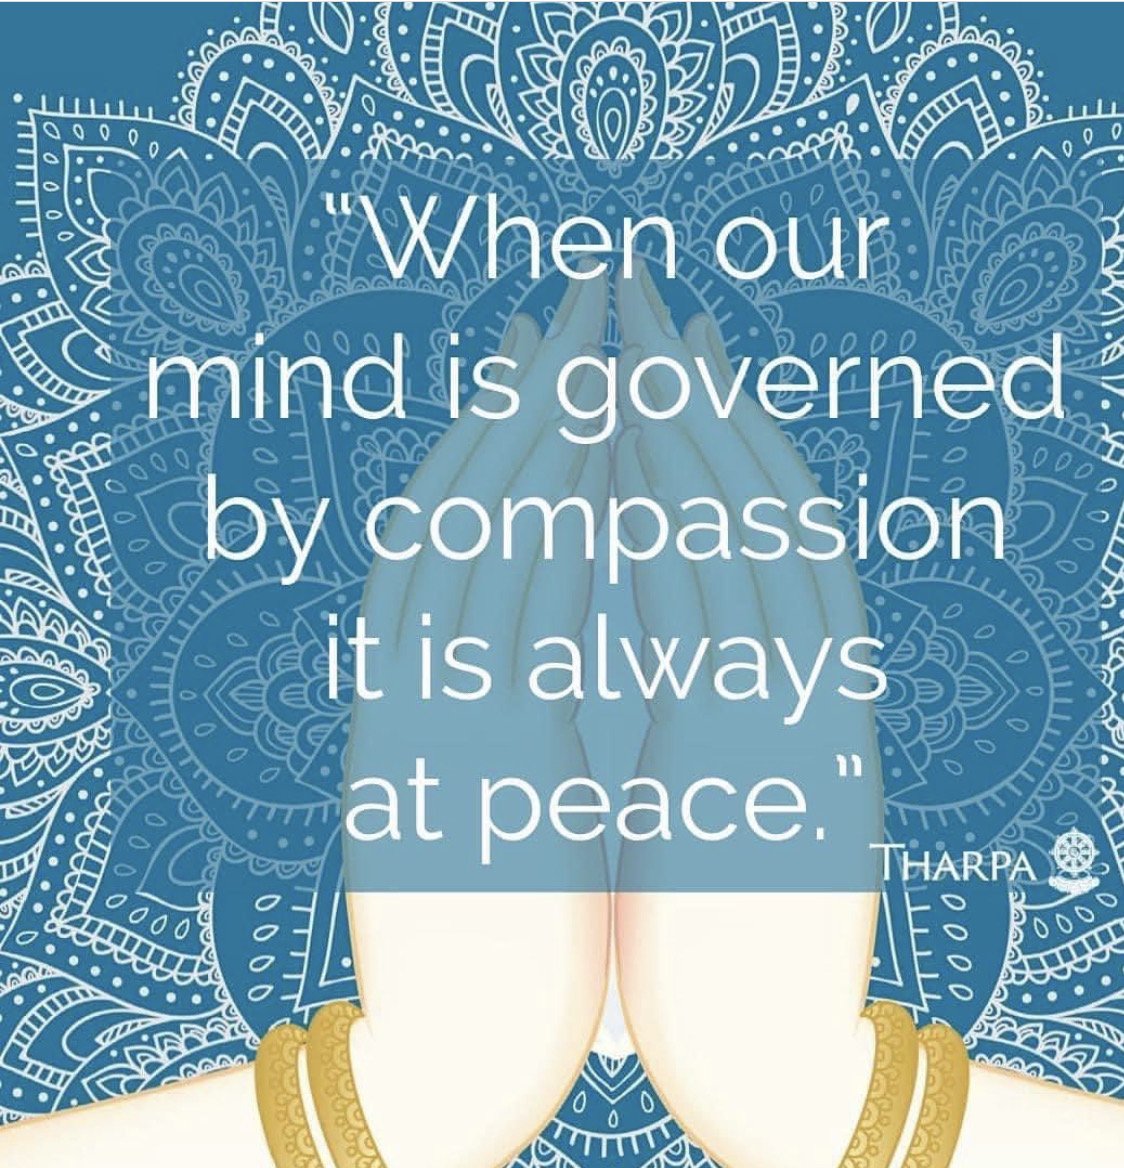 The Wednesday 7pm class this week with Gen Khedrub will explore Buddha's teachings on how to expand and deepen our mind of compassion. Relax, recharge and connect with other meditators. Everyone is welcome. 

2298 Massachusetts Ave., just a few block